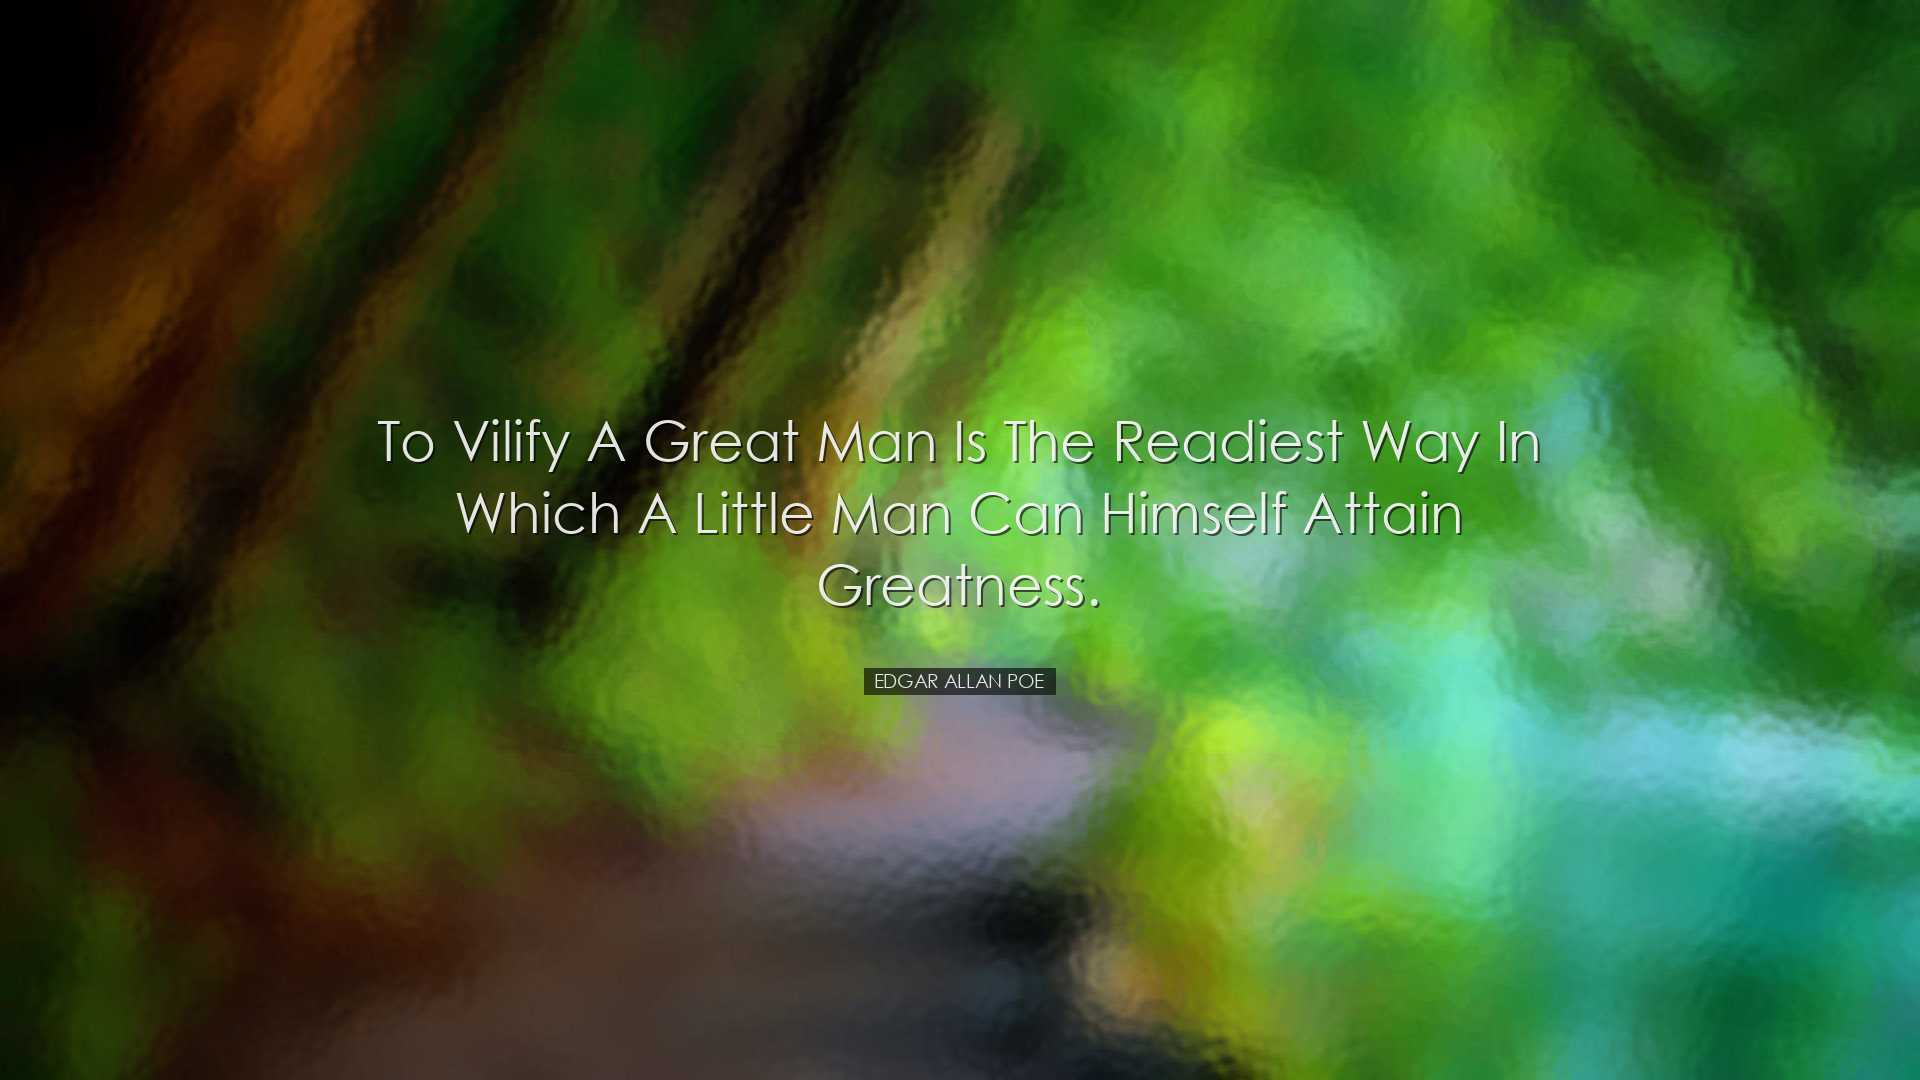 To vilify a great man is the readiest way in which a little man ca